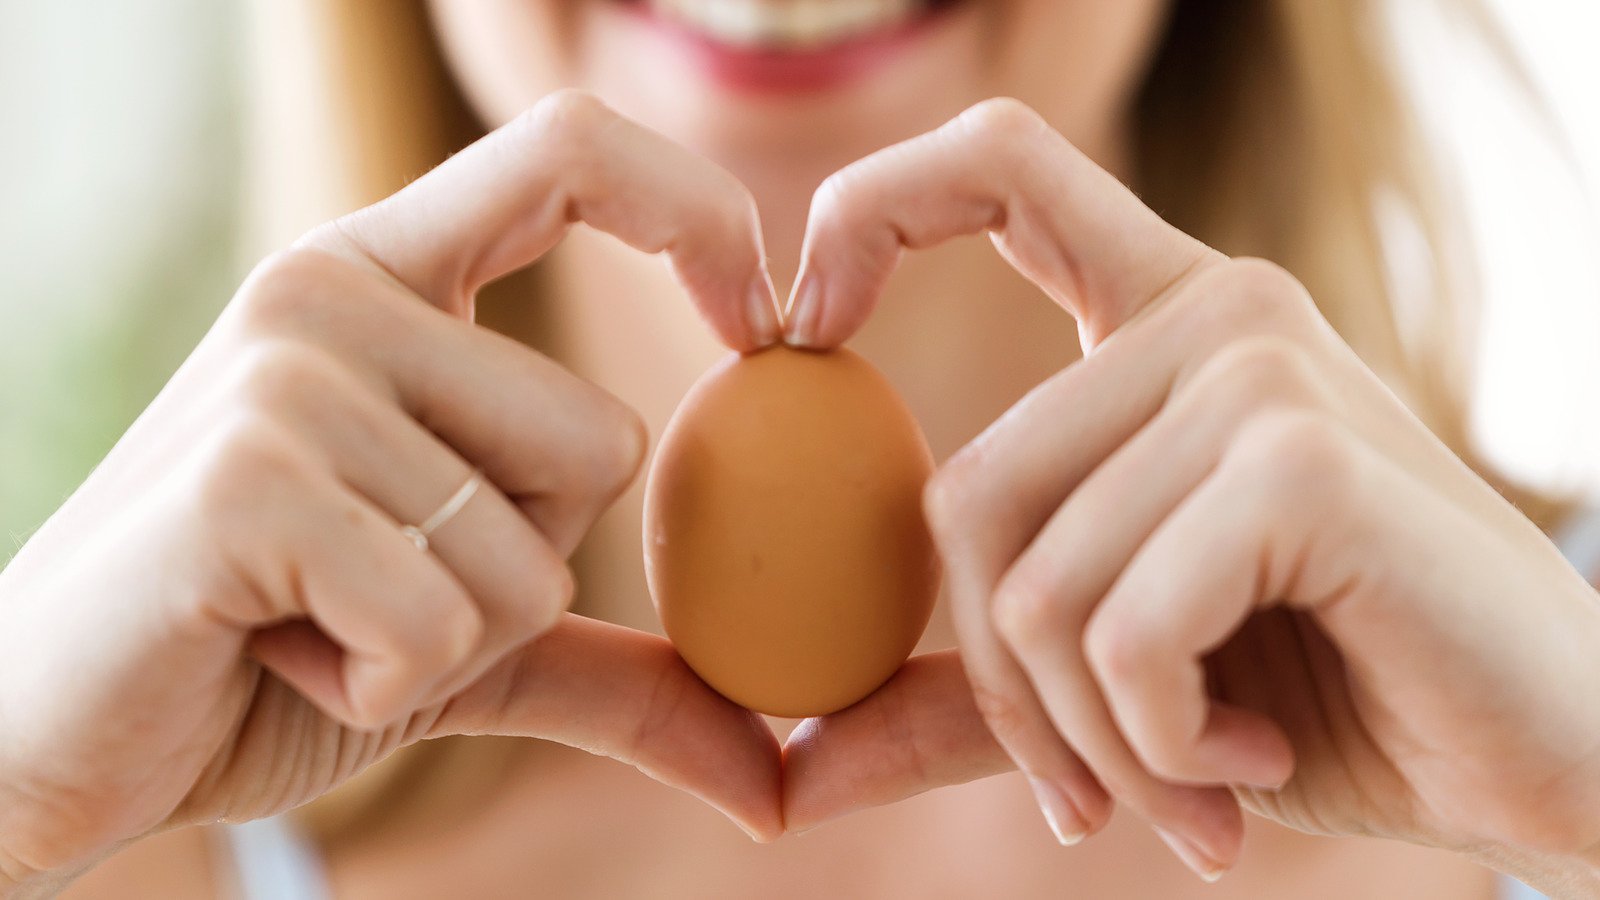 When You Eat Eggs Every Day, This Is What Really Happens To Your Body